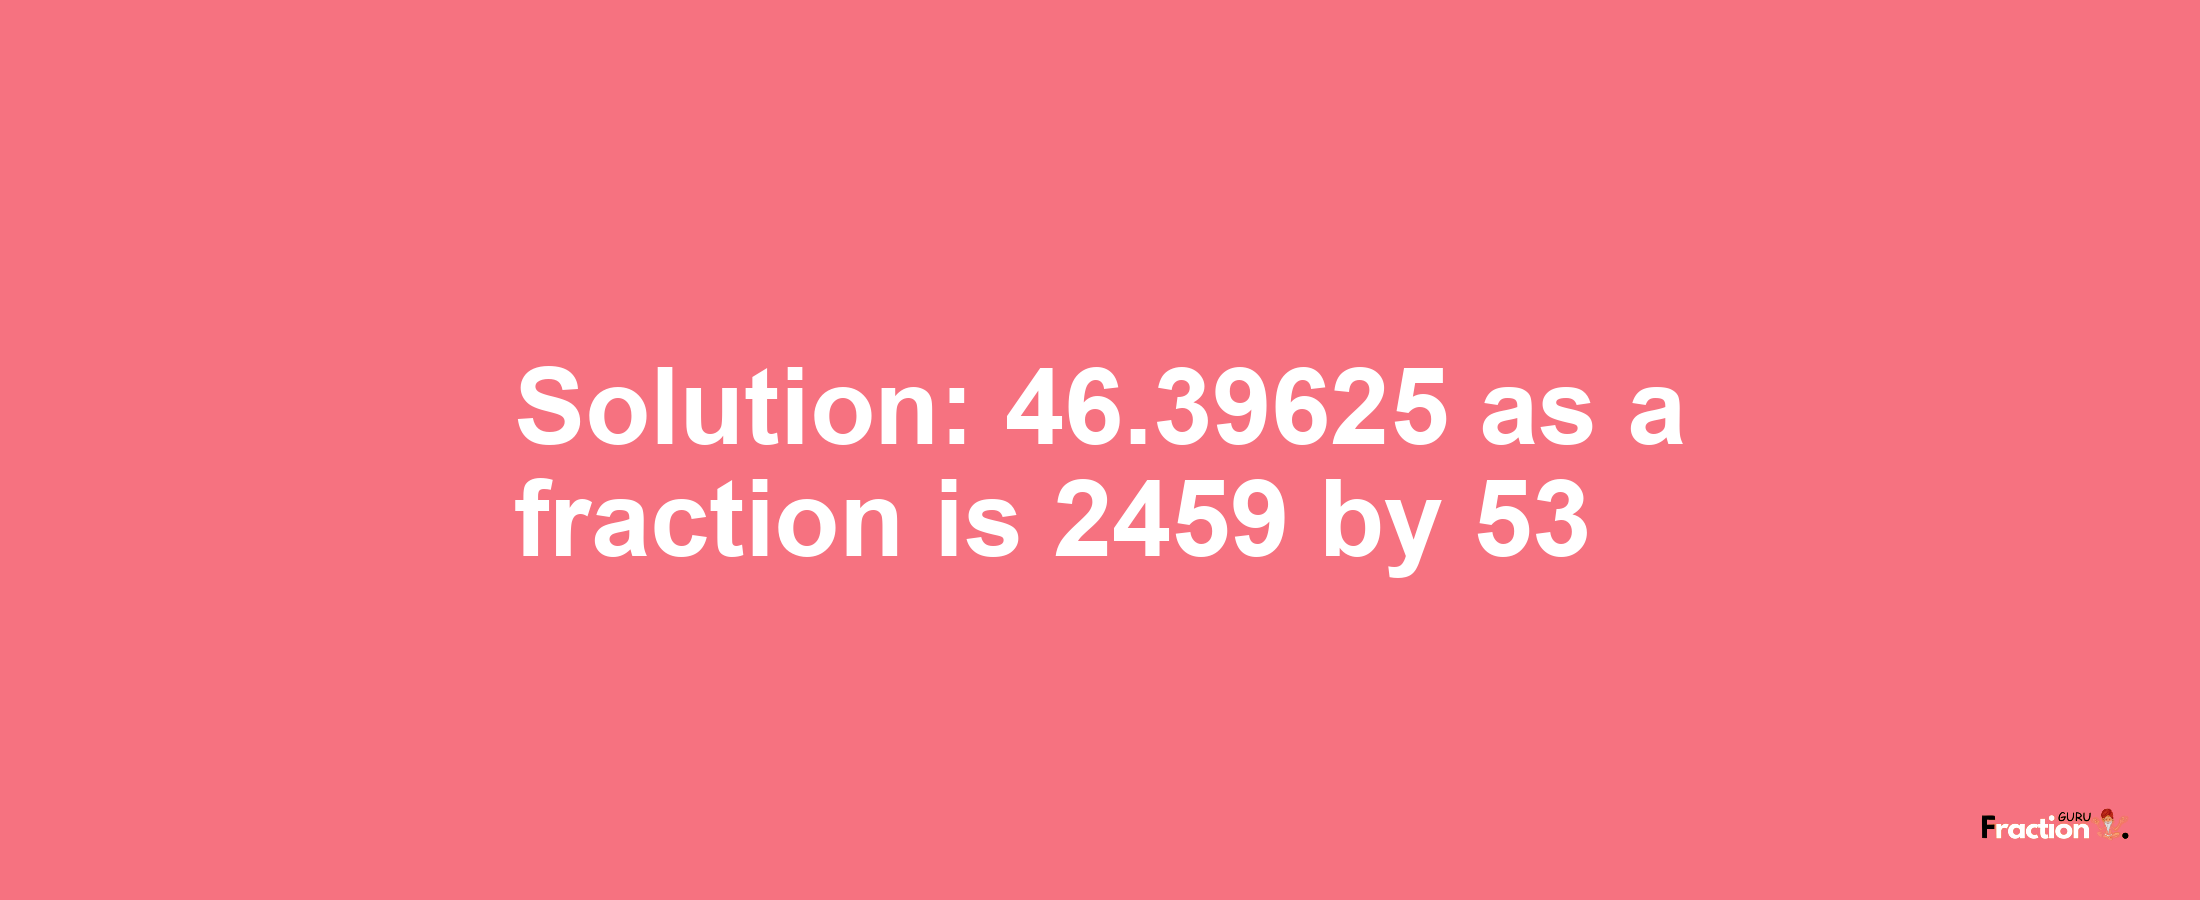 Solution:46.39625 as a fraction is 2459/53